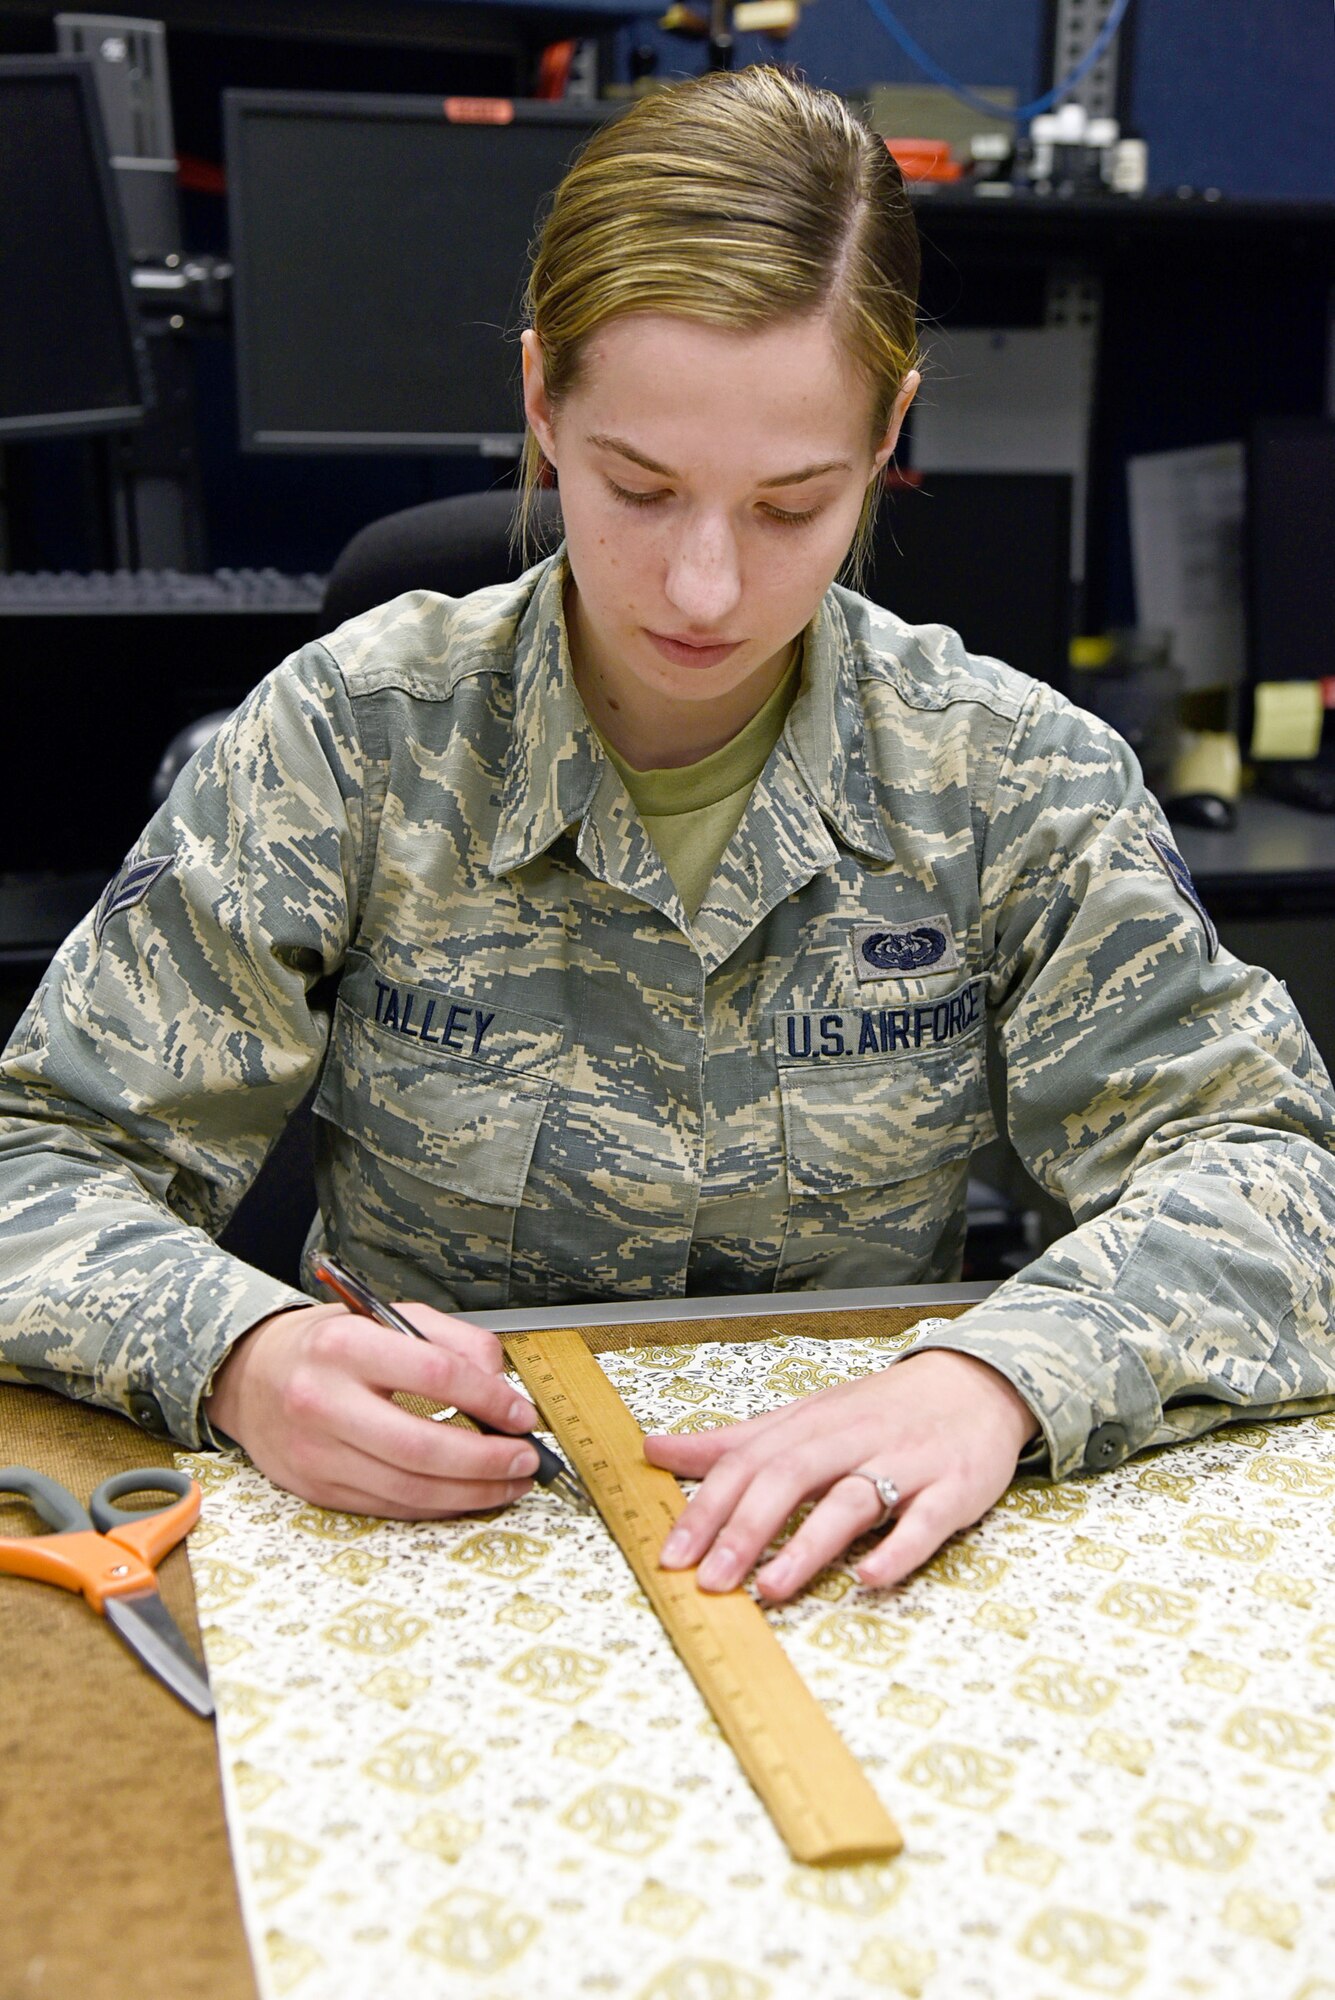 Airman First Class Sarah Talley, with the 552nd Air Control Network Squadron, measures fabric which will be made into face masks to be donated to local hospice and medical facilities around the Tinker community. Fabric and materials were donated by a local store, Sew and Sews, for this project. Over 100 fabric masks have already been made and are ready to donate. (U.S. Air Force photo/Kelly White)